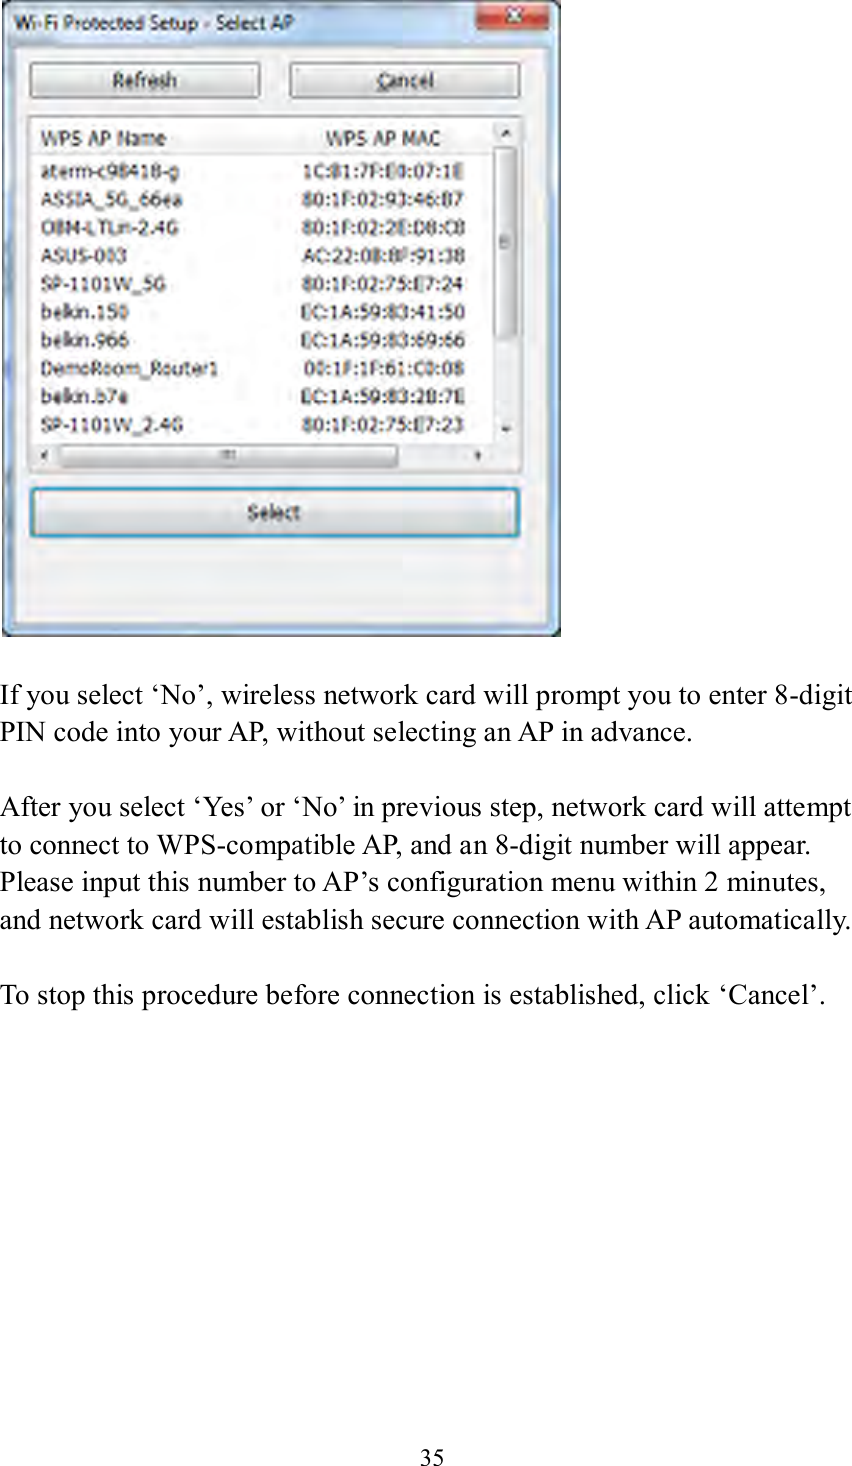 35      If you select ‘No’, wireless network card will prompt you to enter 8-digit PIN code into your AP, without selecting an AP in advance.  After you select ‘Yes’ or ‘No’ in previous step, network card will attempt to connect to WPS-compatible AP, and an 8-digit number will appear. Please input this number to AP’s configuration menu within 2 minutes, and network card will establish secure connection with AP automatically.  To stop this procedure before connection is established, click ‘Cancel’.  